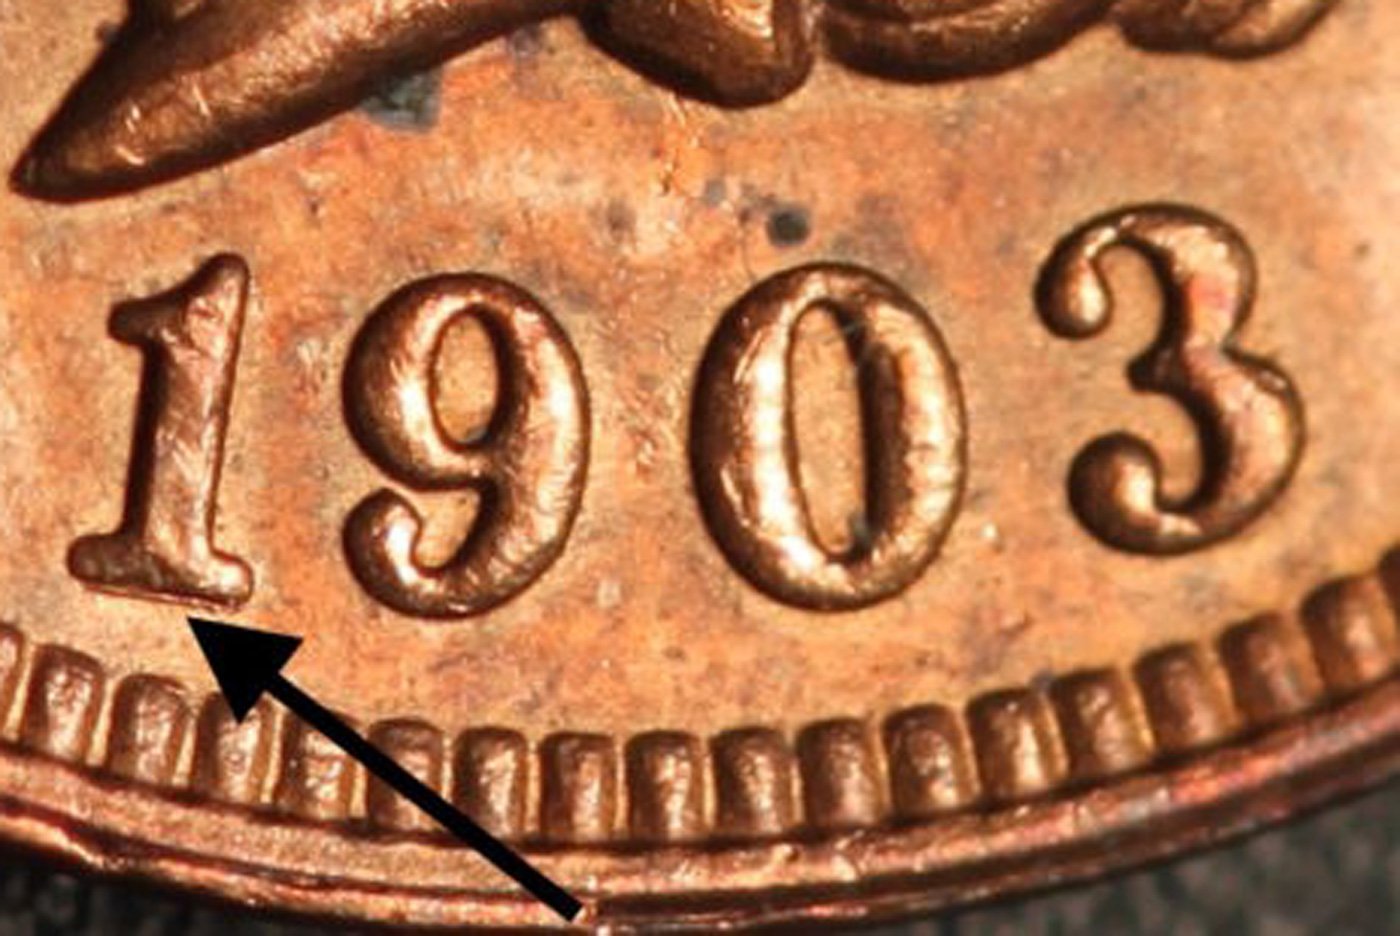 1903 RPD-015 - Indian Head Penny - Photo by Ed Nathanson